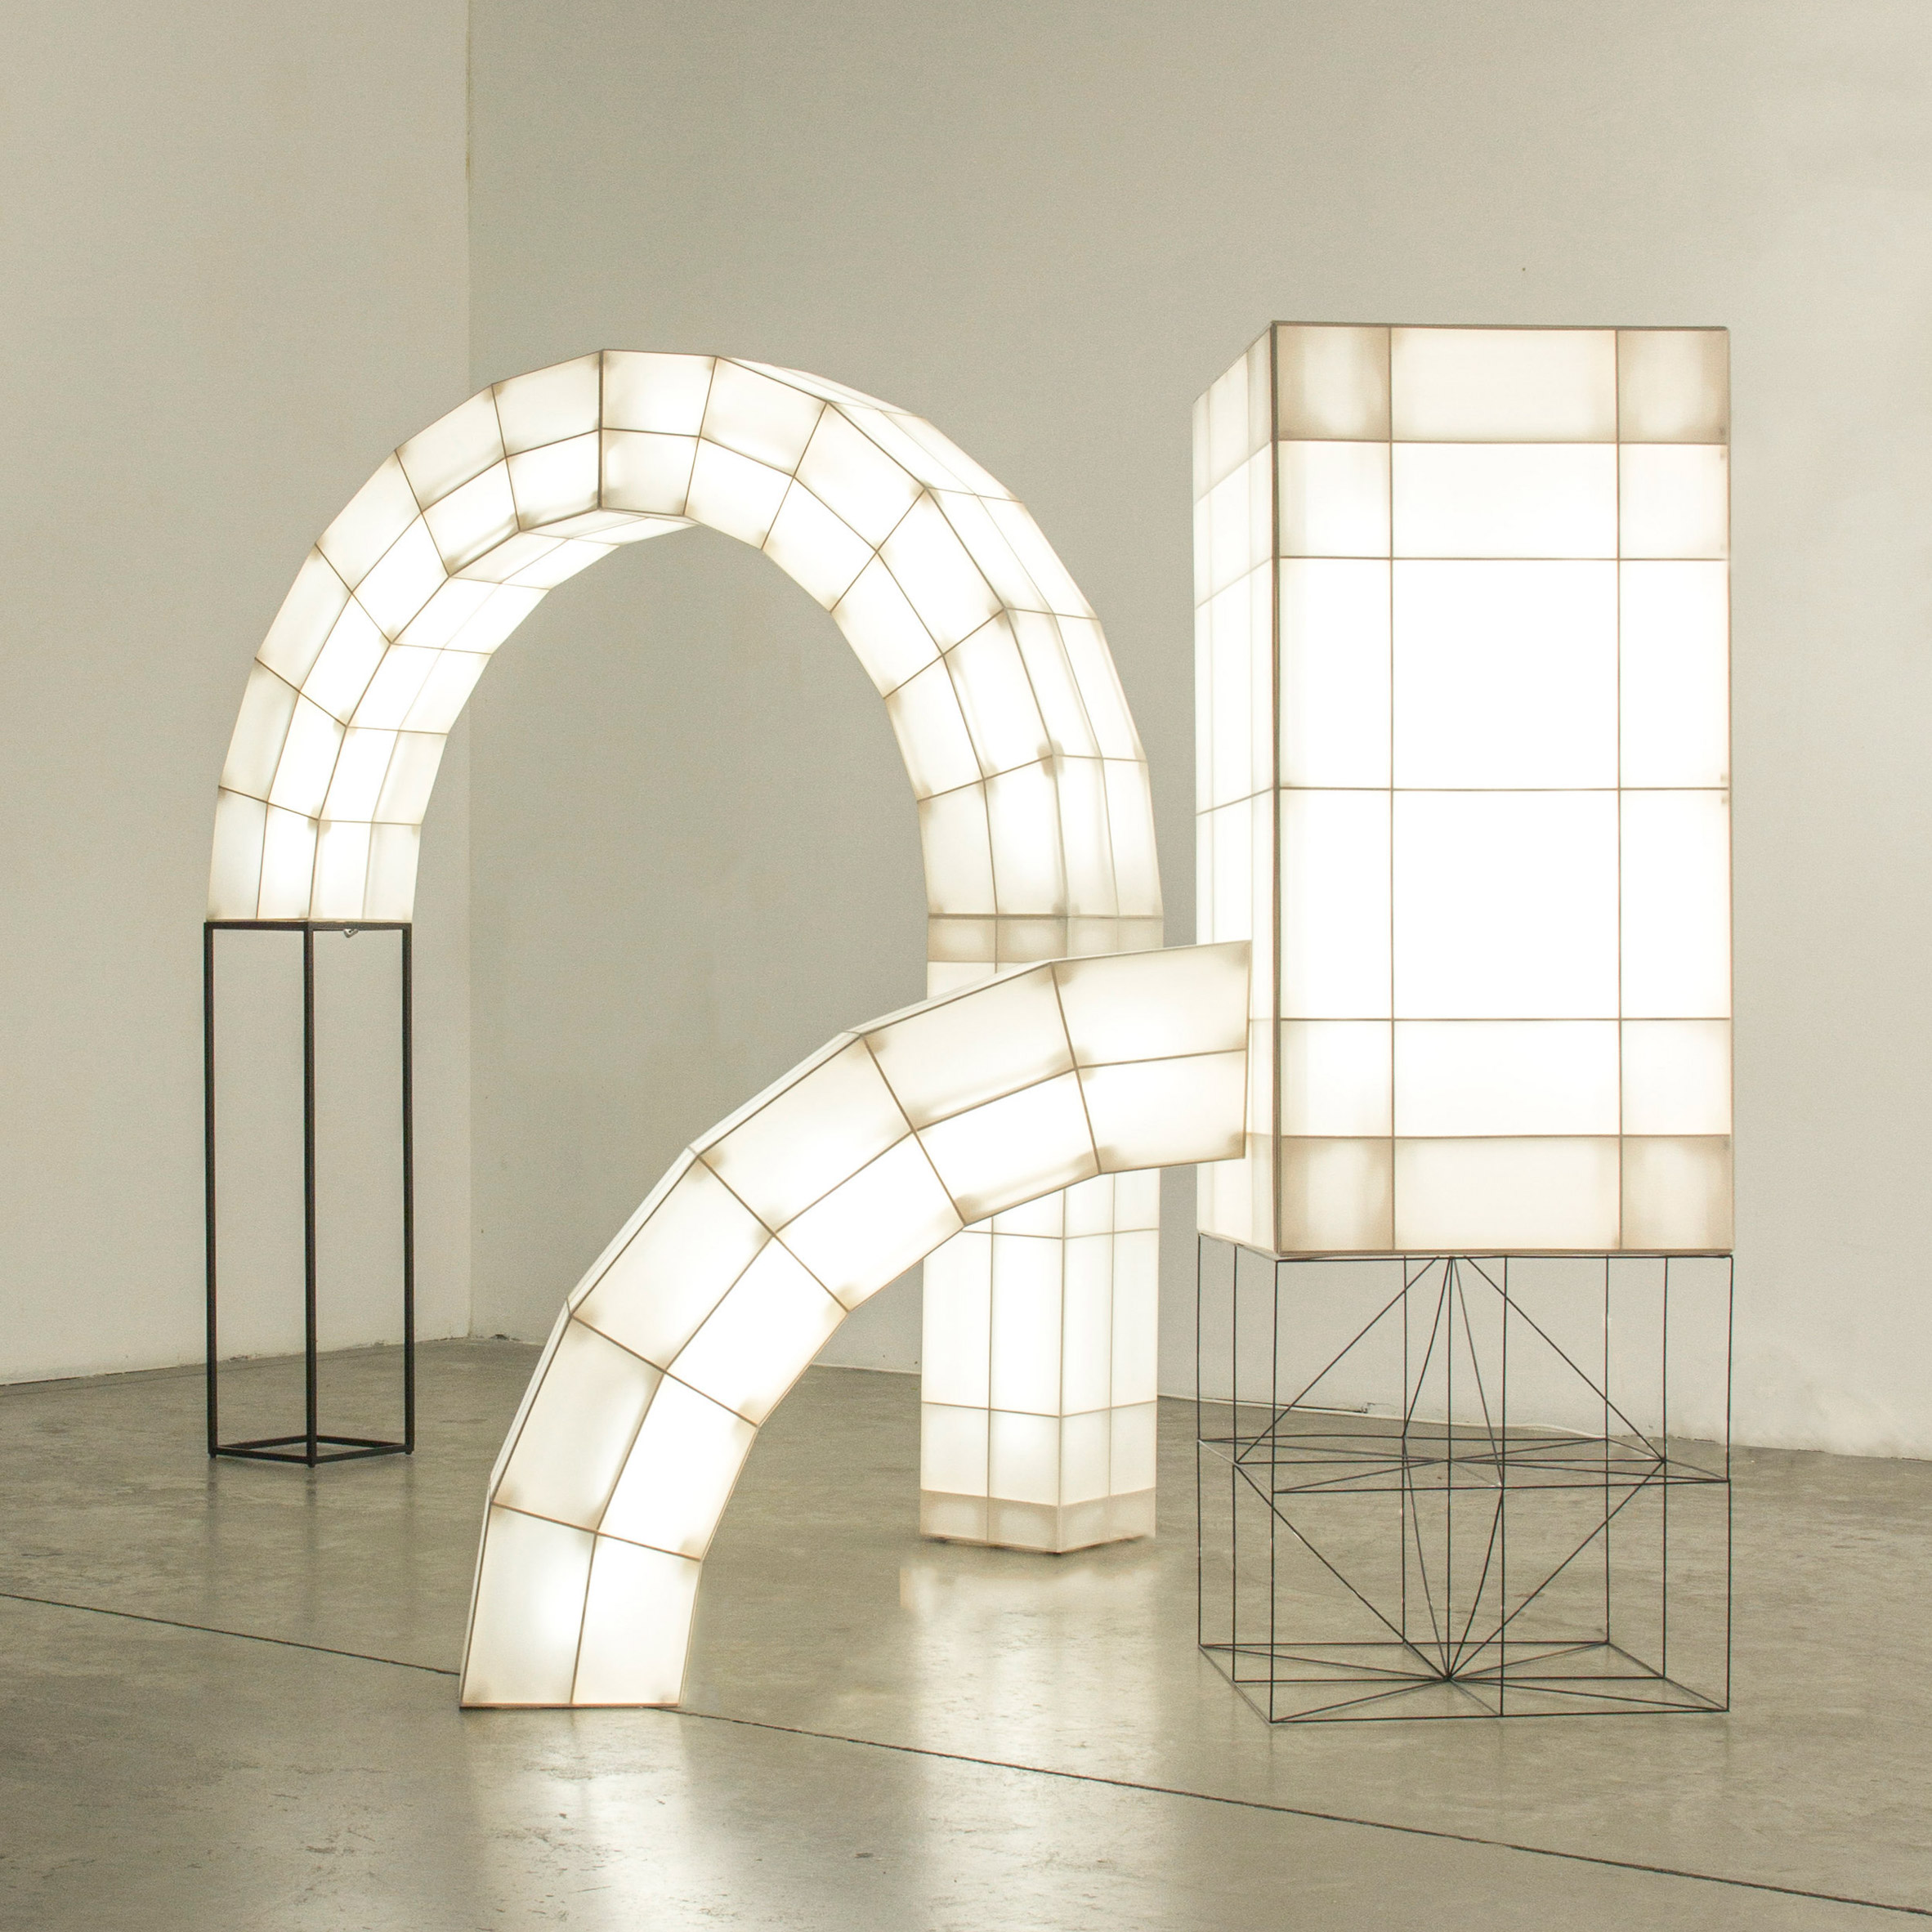 10 of the best objects on show for first Collectible contemporary design fair